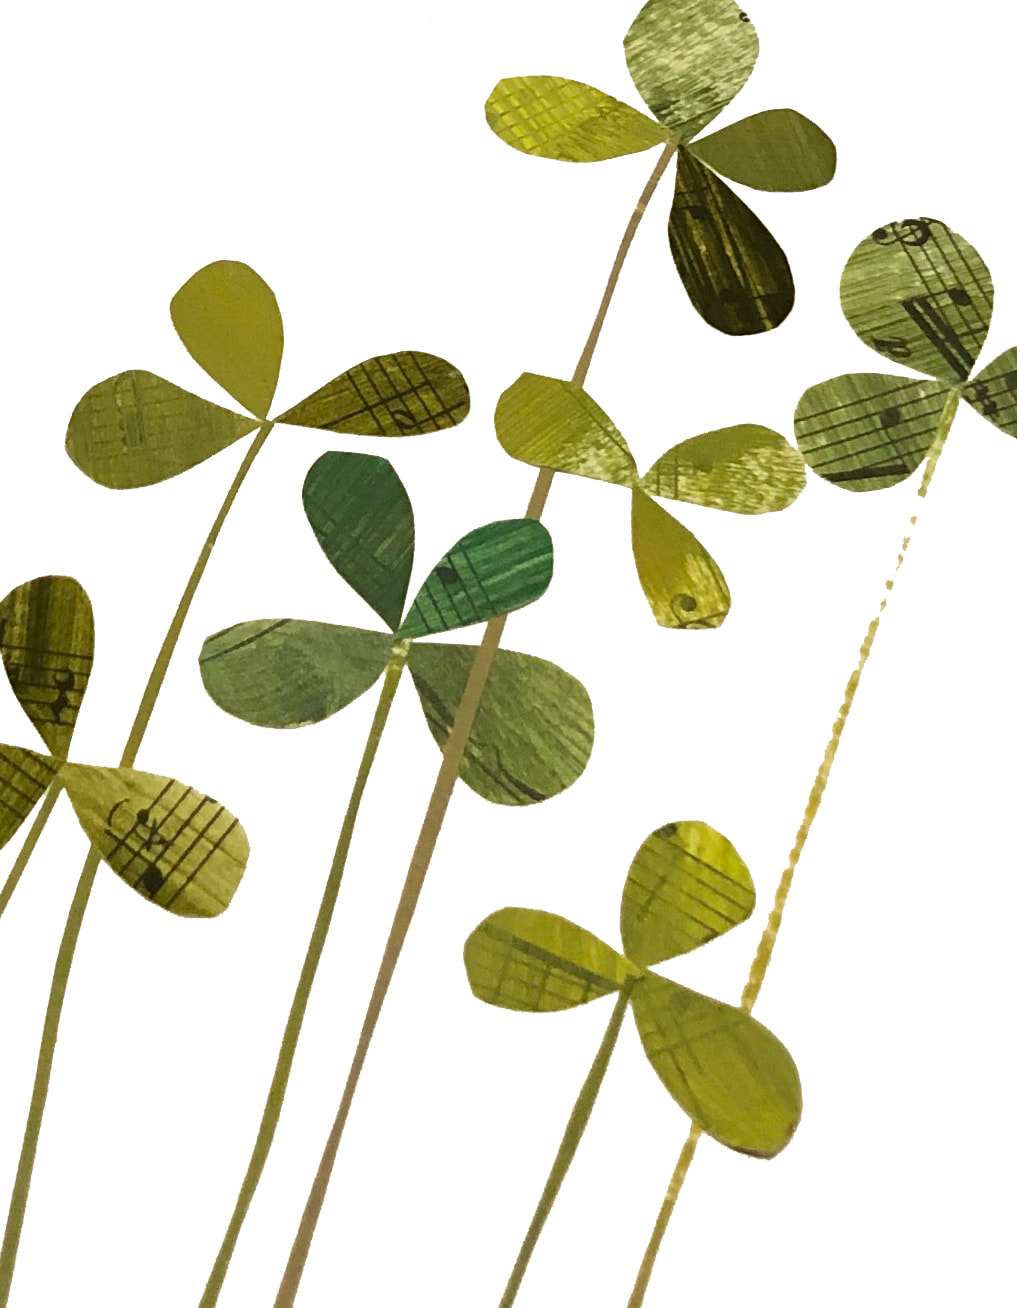 collage of clover on stems with one 4-leaf clover